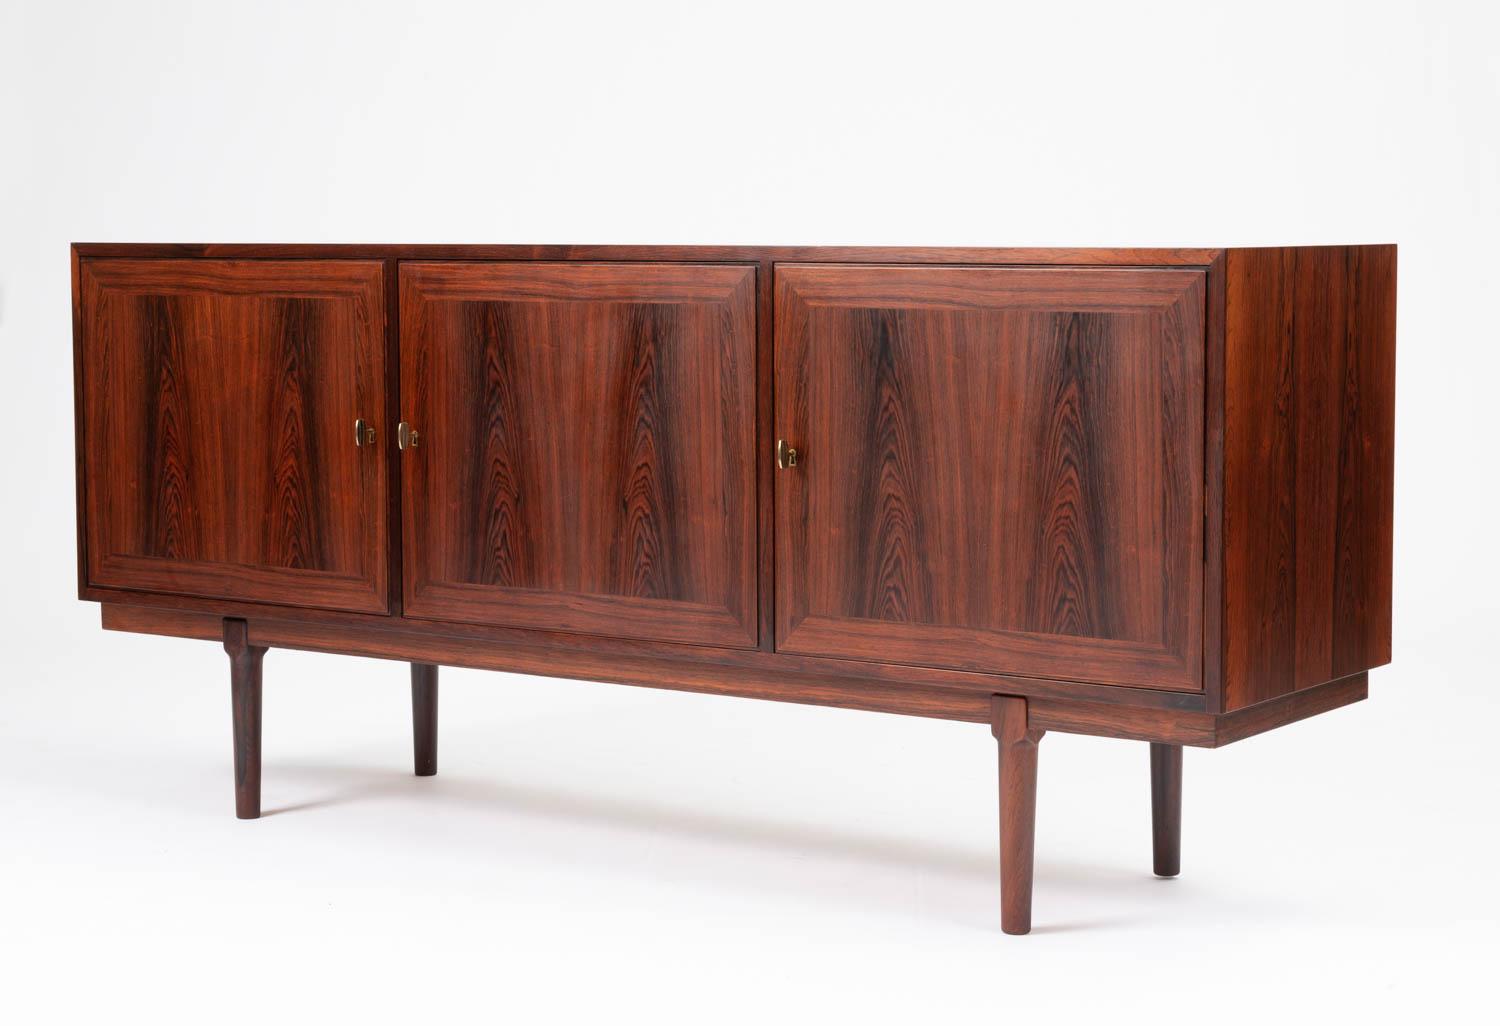 A striking rosewood credenza by Arne Vodder for Vamo Sonderborg. The credenza features three hinged rosewood doors with beautiful grain that open and can be locked by individual brass keys. The two outer sections each feature a single adjustable